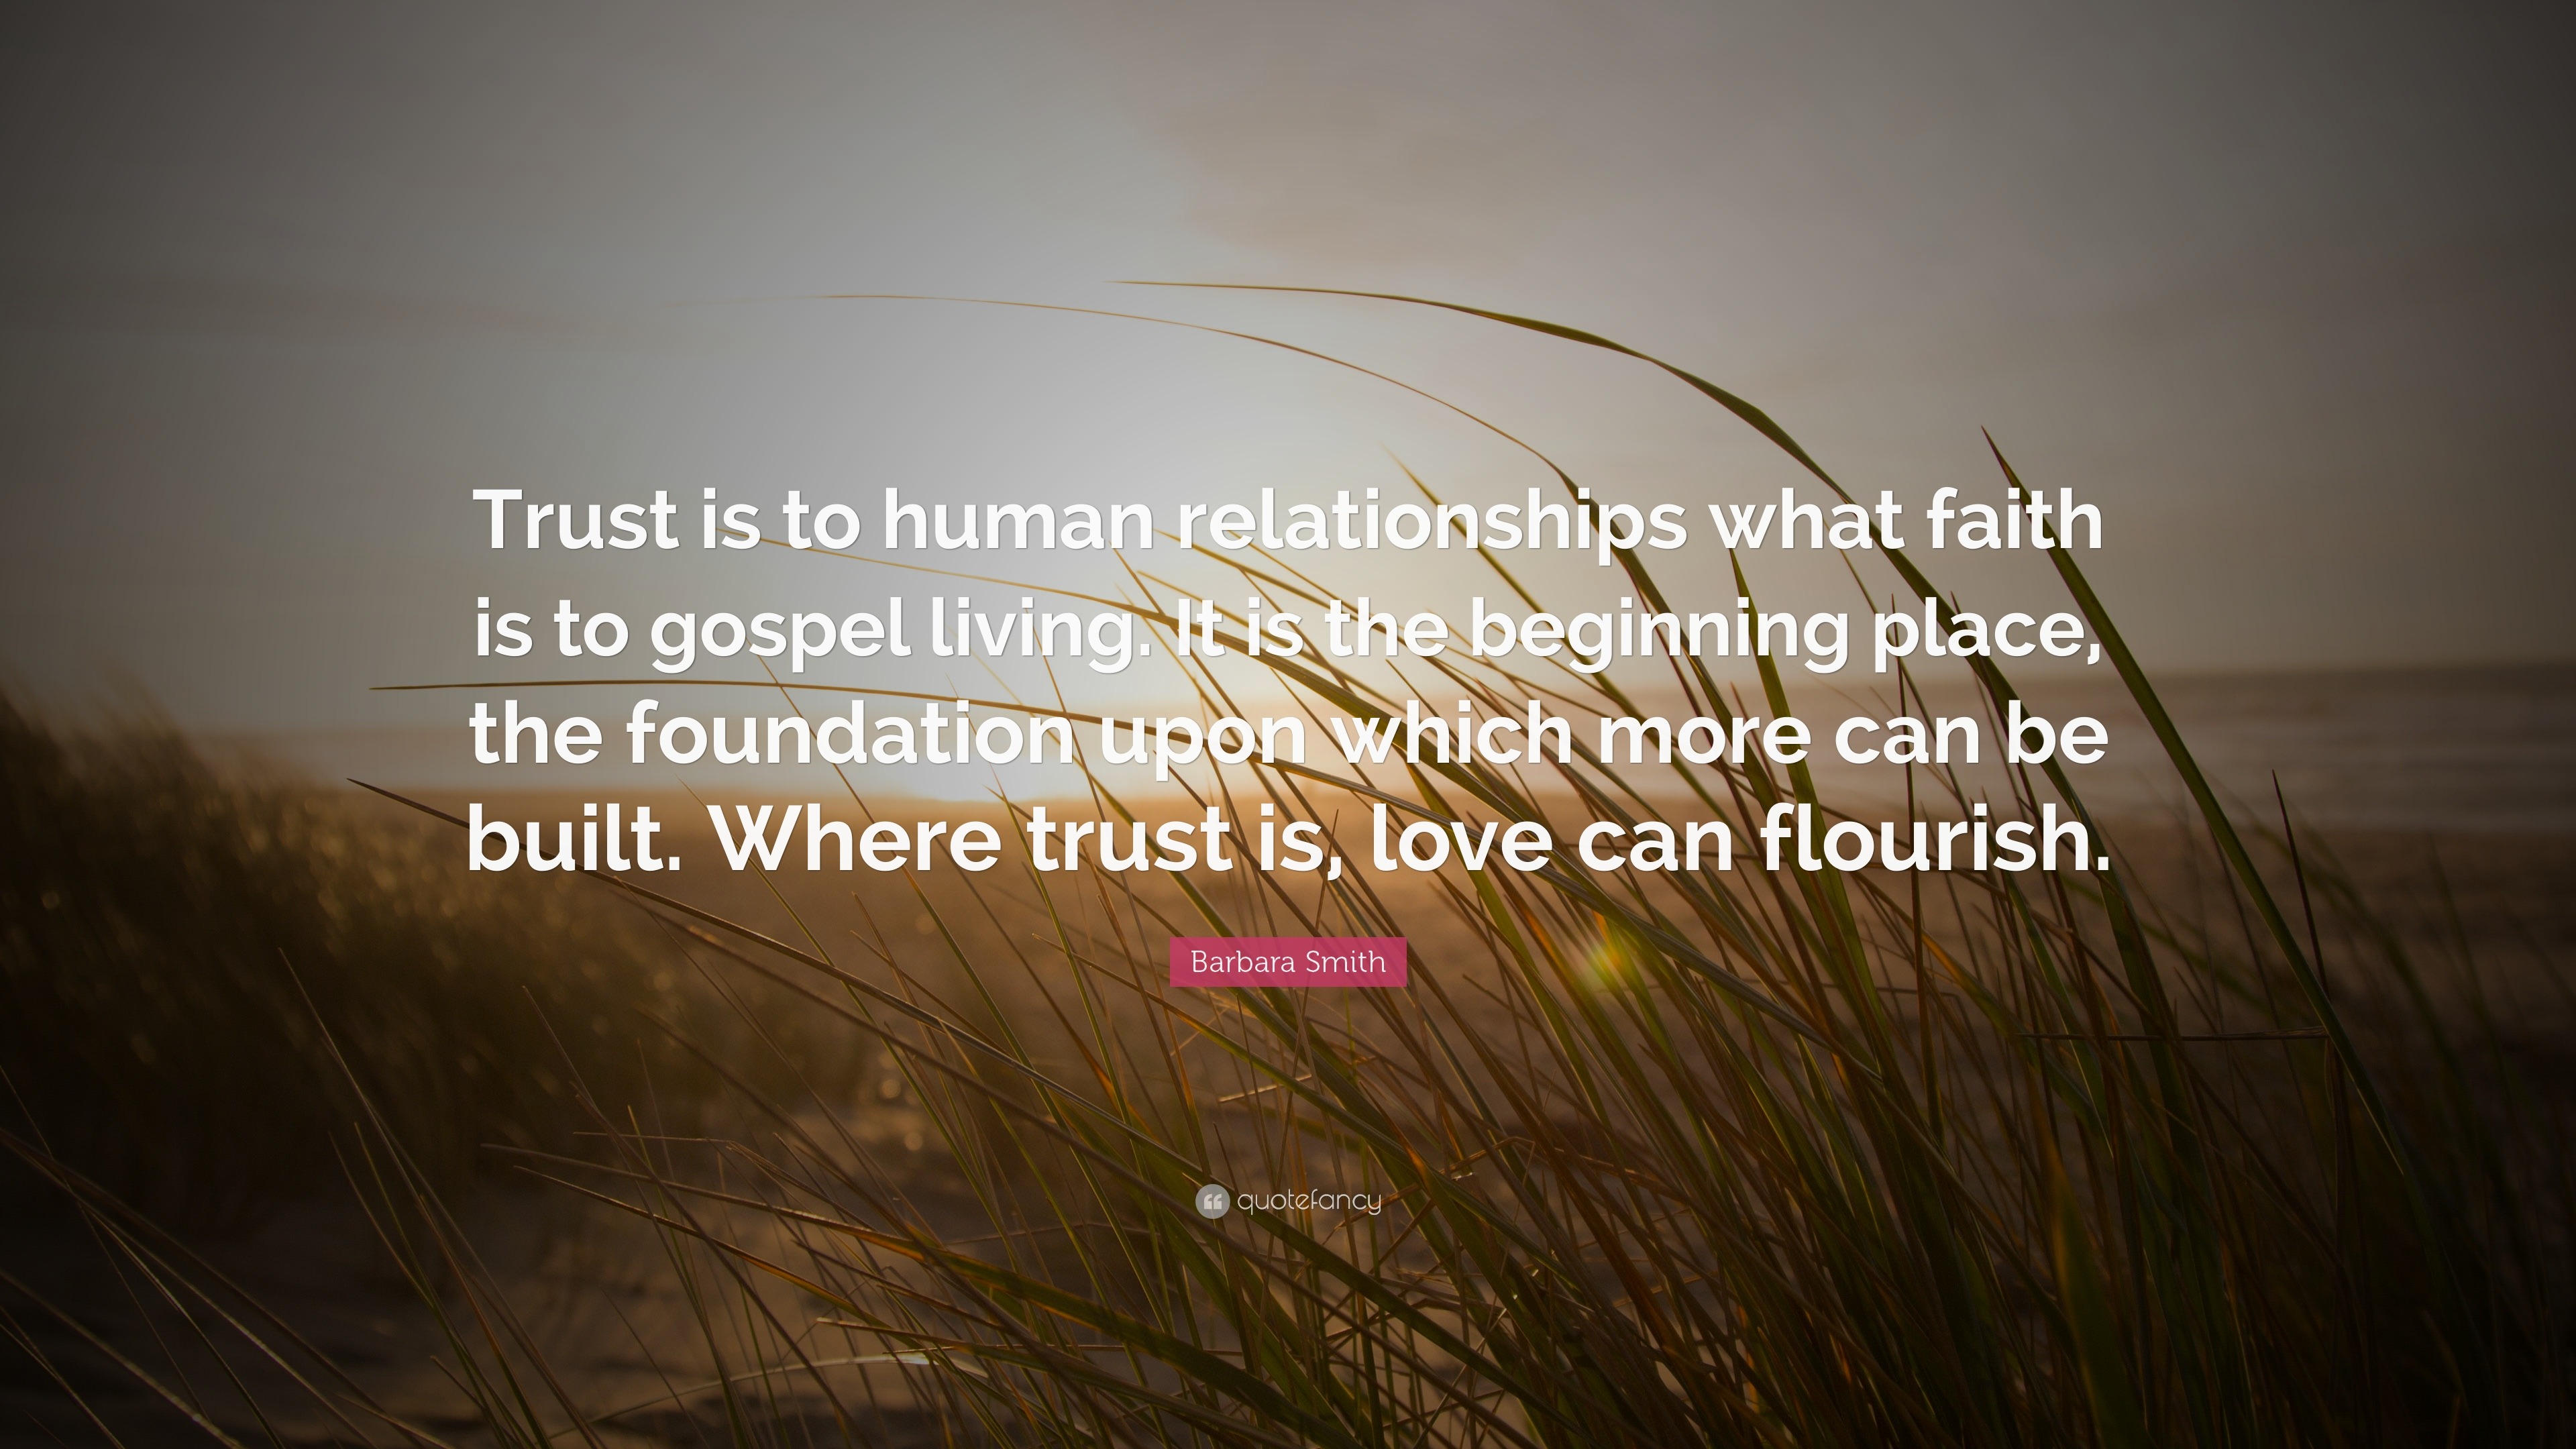 Barbara Smith Quote “Trust is to human relationships what faith is to gospel living